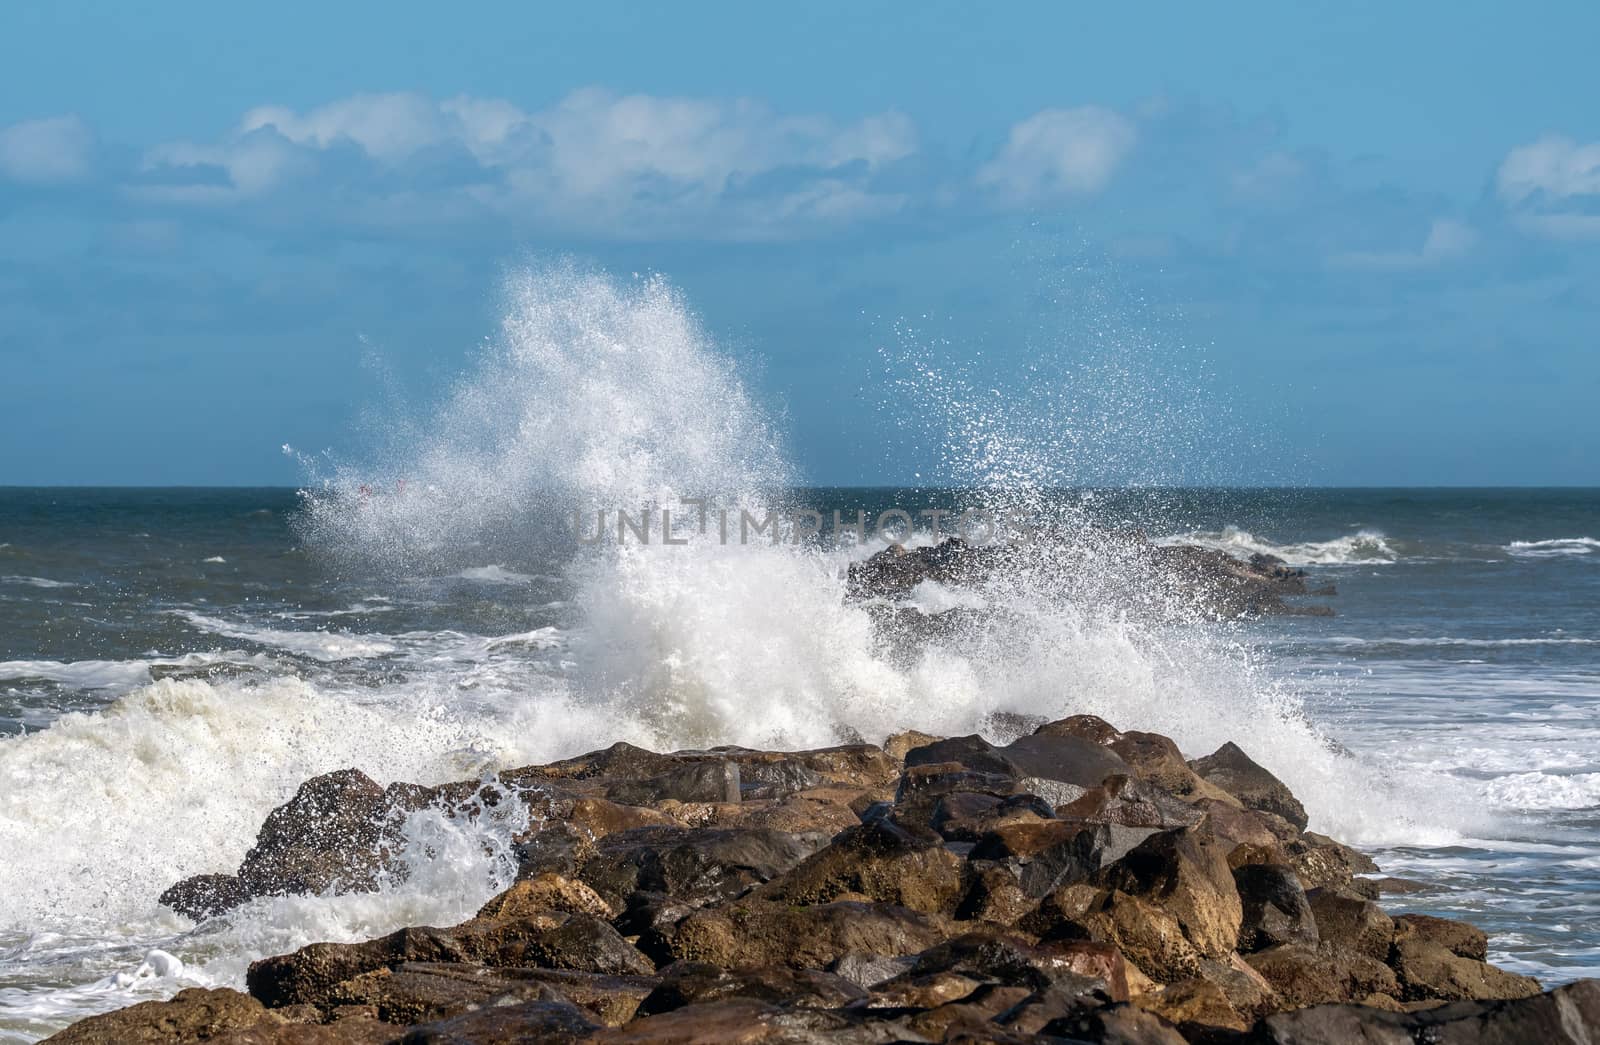 Waves breaking over a rock jetty wall.